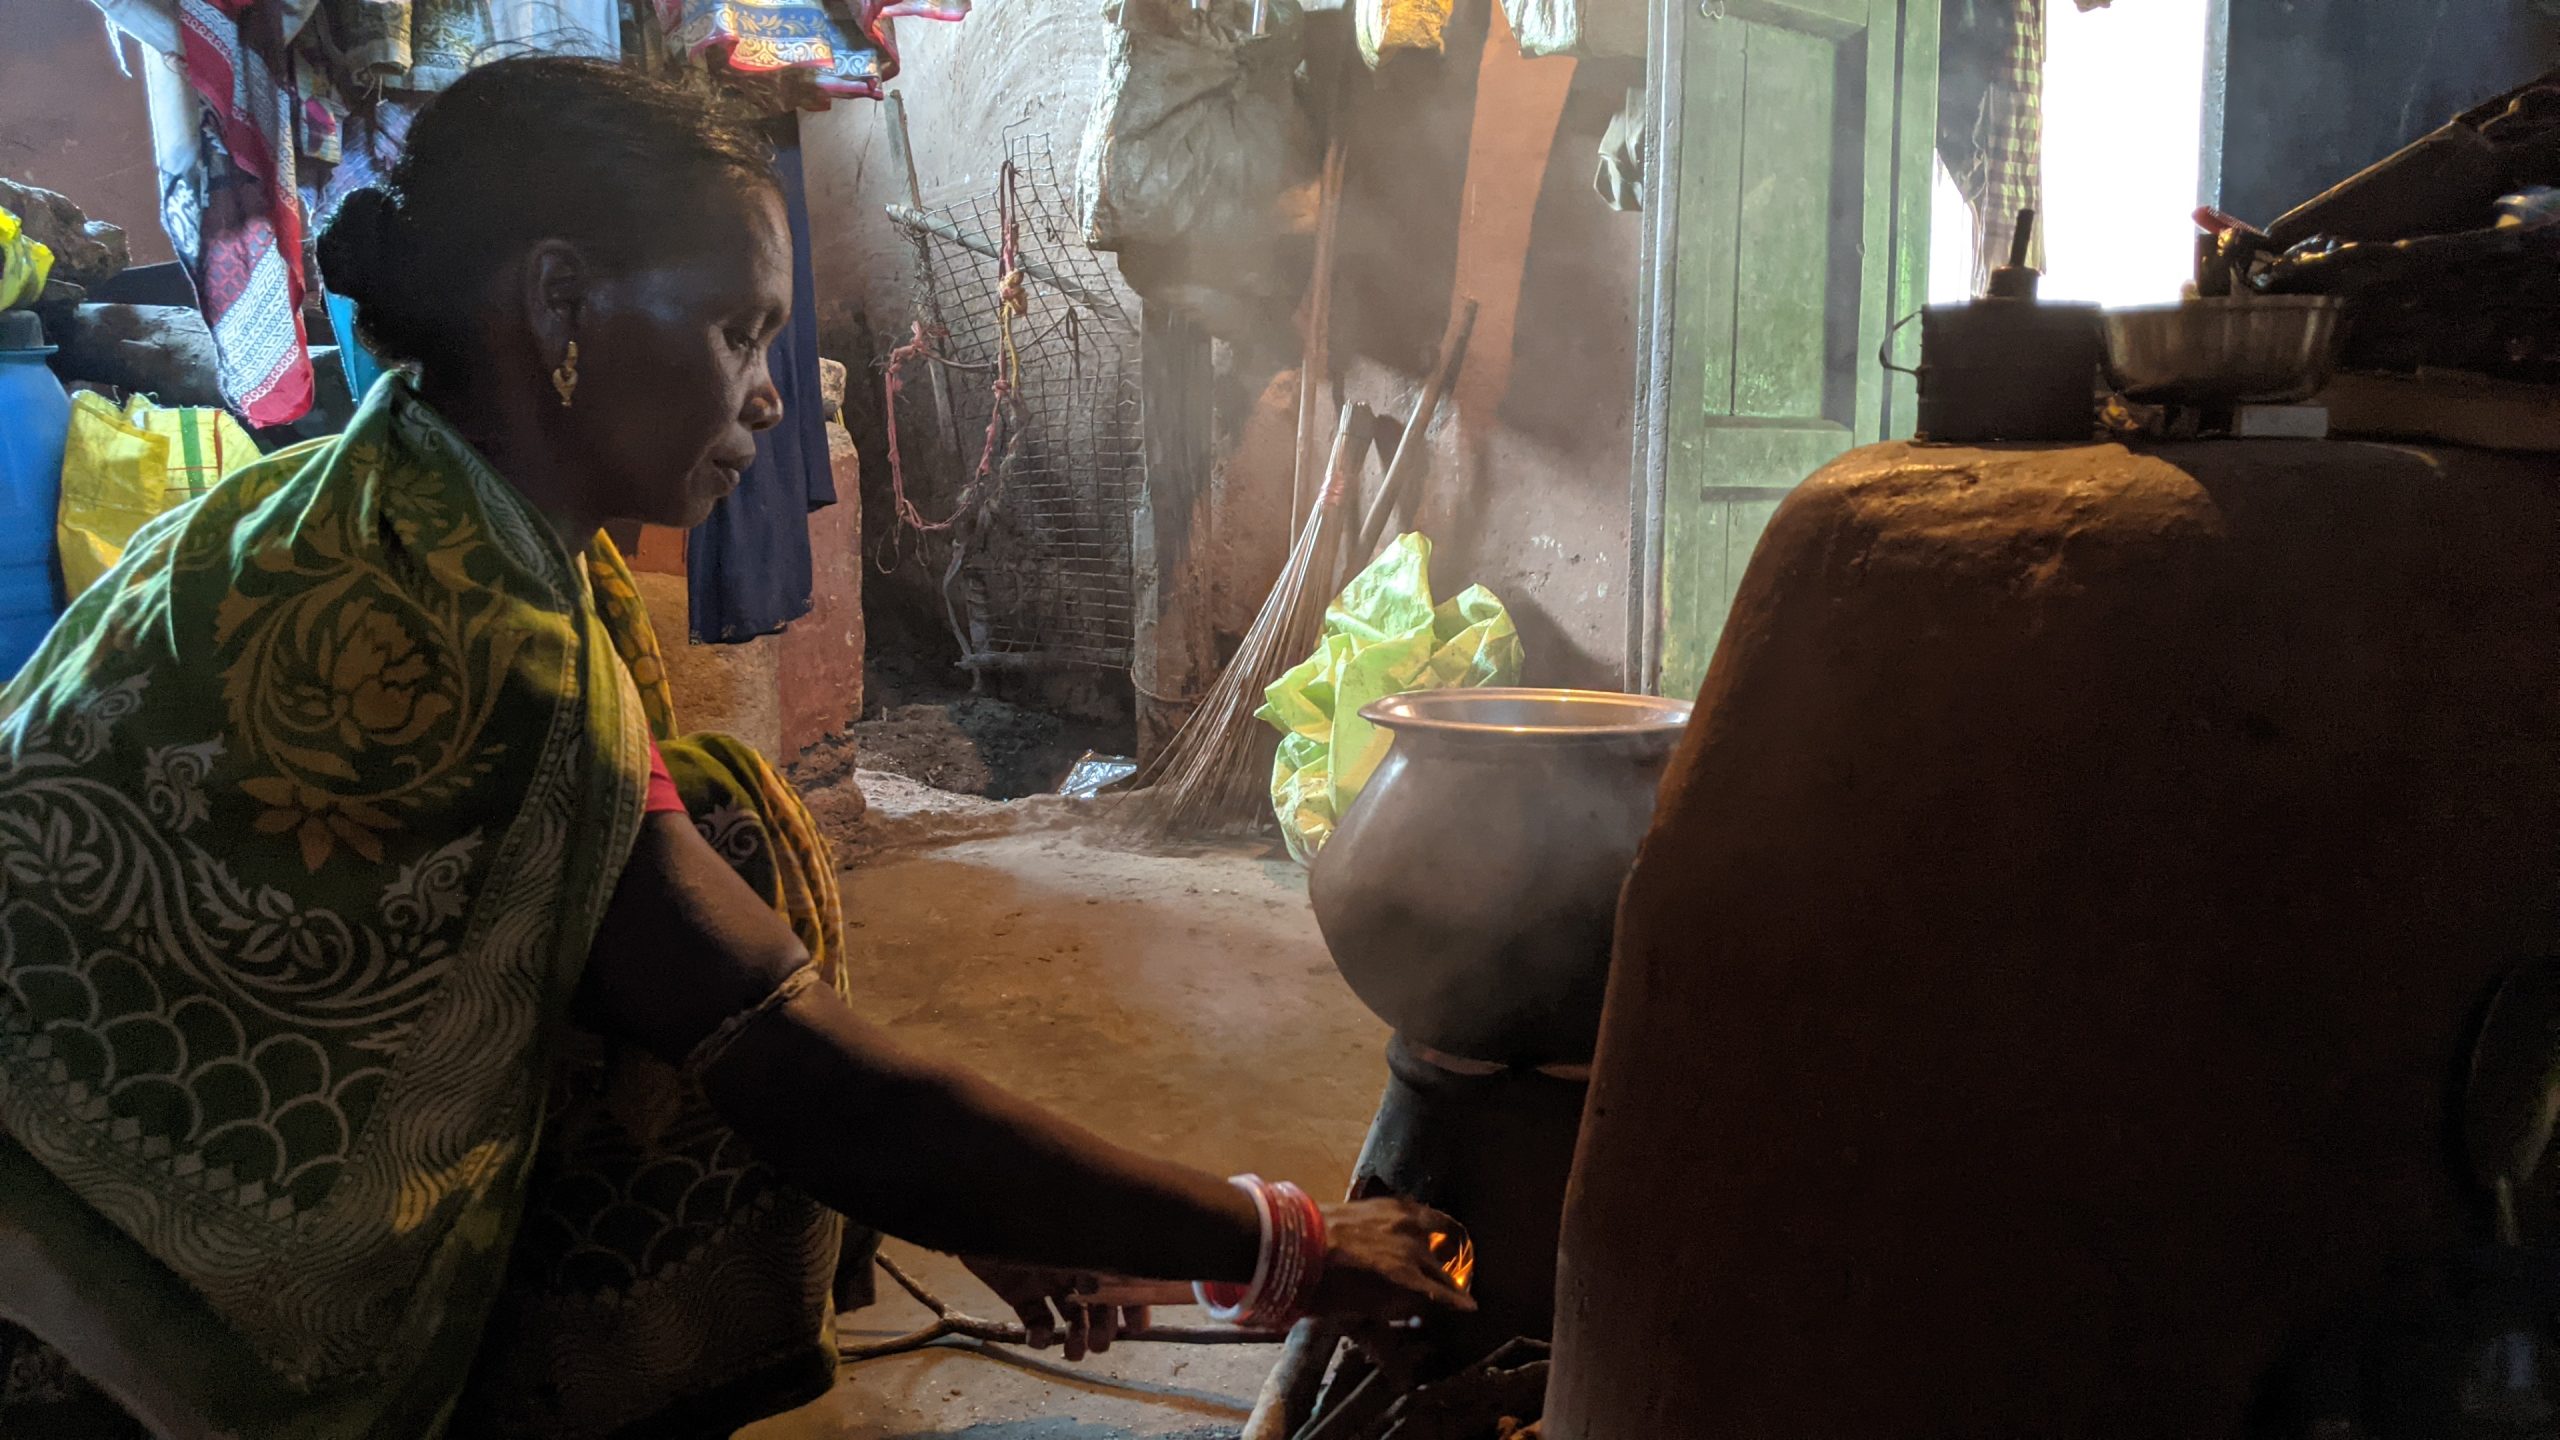 Anita Naik lights up her wood fire stove to prepare food, at her family home in the village of Badbil, in the Mayurbhanj district of India’s Odisha state. (Photo: CIMMYT)